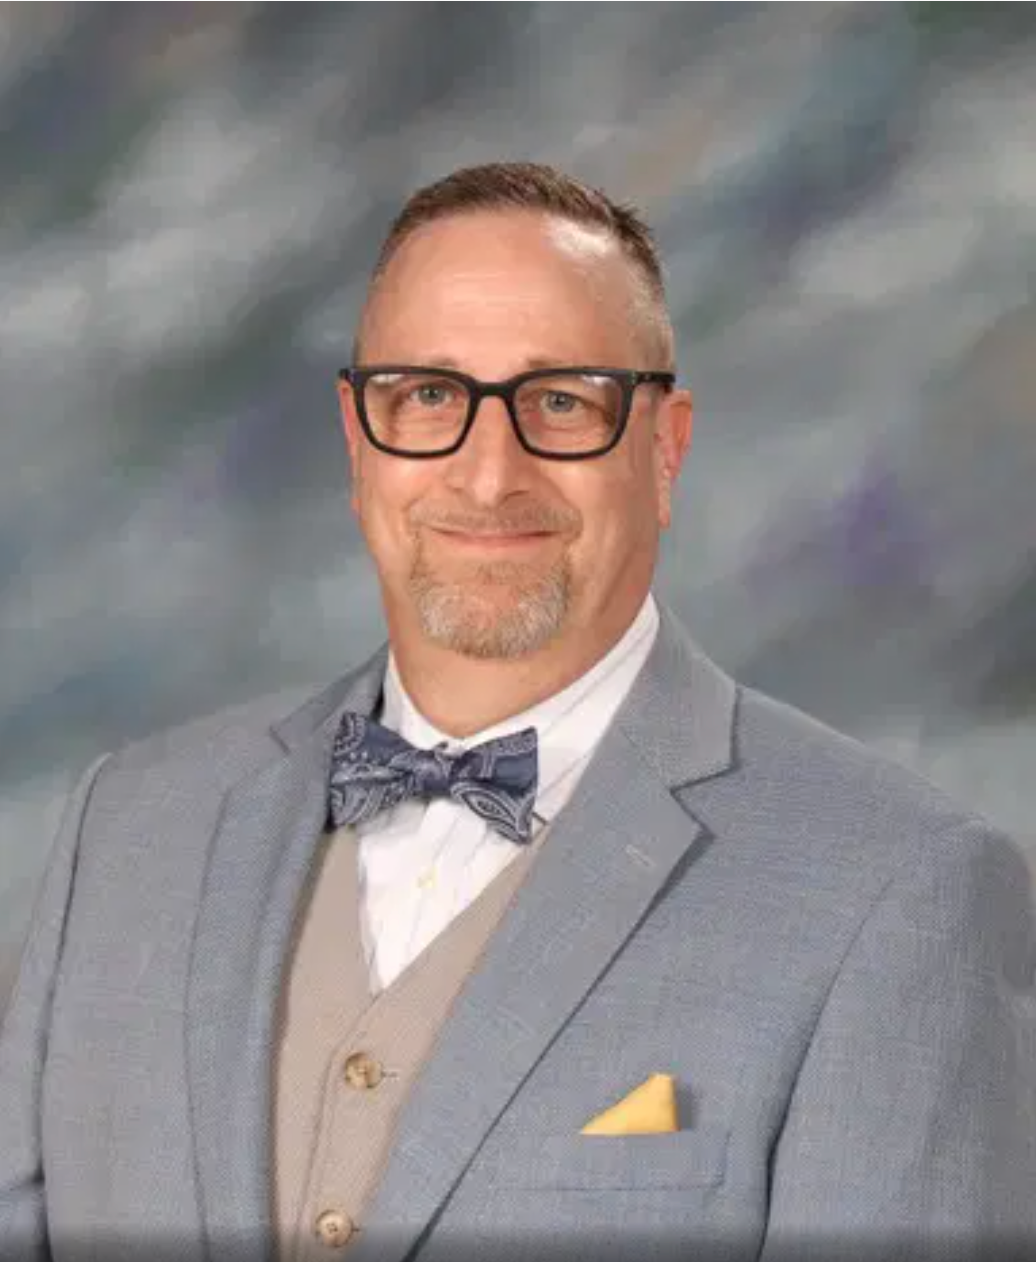 Principal Noah Hamilton will not return to OHS for the 2022-23 school year, instead beginning to work in the OSD Central Office as the Director of Accountability and Accreditation.